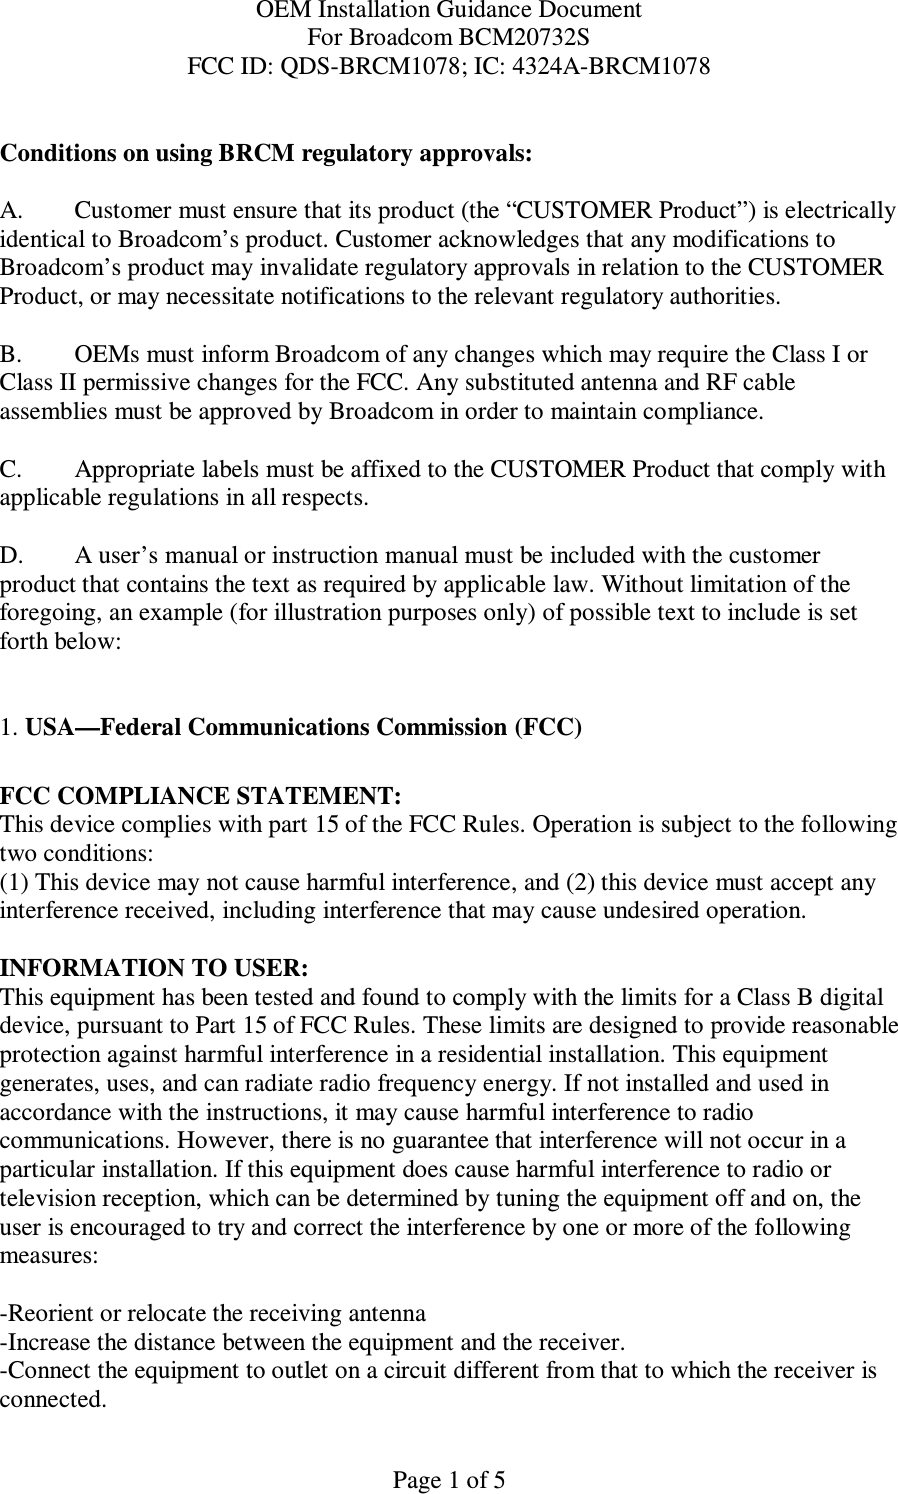 OEM Installation Guidance Document For Broadcom BCM20732S FCC ID: QDS-BRCM1078; IC: 4324A-BRCM1078  Page 1 of 5  Conditions on using BRCM regulatory approvals:   A.  Customer must ensure that its product (the “CUSTOMER Product”) is electrically identical to Broadcom’s product. Customer acknowledges that any modifications to Broadcom’s product may invalidate regulatory approvals in relation to the CUSTOMER Product, or may necessitate notifications to the relevant regulatory authorities.   B.   OEMs must inform Broadcom of any changes which may require the Class I or Class II permissive changes for the FCC. Any substituted antenna and RF cable assemblies must be approved by Broadcom in order to maintain compliance.  C.  Appropriate labels must be affixed to the CUSTOMER Product that comply with  applicable regulations in all respects.    D.   A user’s manual or instruction manual must be included with the customer product that contains the text as required by applicable law. Without limitation of the foregoing, an example (for illustration purposes only) of possible text to include is set forth below:    1. USA—Federal Communications Commission (FCC)  FCC COMPLIANCE STATEMENT: This device complies with part 15 of the FCC Rules. Operation is subject to the following two conditions: (1) This device may not cause harmful interference, and (2) this device must accept any interference received, including interference that may cause undesired operation.  INFORMATION TO USER: This equipment has been tested and found to comply with the limits for a Class B digital device, pursuant to Part 15 of FCC Rules. These limits are designed to provide reasonable protection against harmful interference in a residential installation. This equipment generates, uses, and can radiate radio frequency energy. If not installed and used in accordance with the instructions, it may cause harmful interference to radio communications. However, there is no guarantee that interference will not occur in a particular installation. If this equipment does cause harmful interference to radio or television reception, which can be determined by tuning the equipment off and on, the user is encouraged to try and correct the interference by one or more of the following measures:    -Reorient or relocate the receiving antenna -Increase the distance between the equipment and the receiver. -Connect the equipment to outlet on a circuit different from that to which the receiver is connected. 